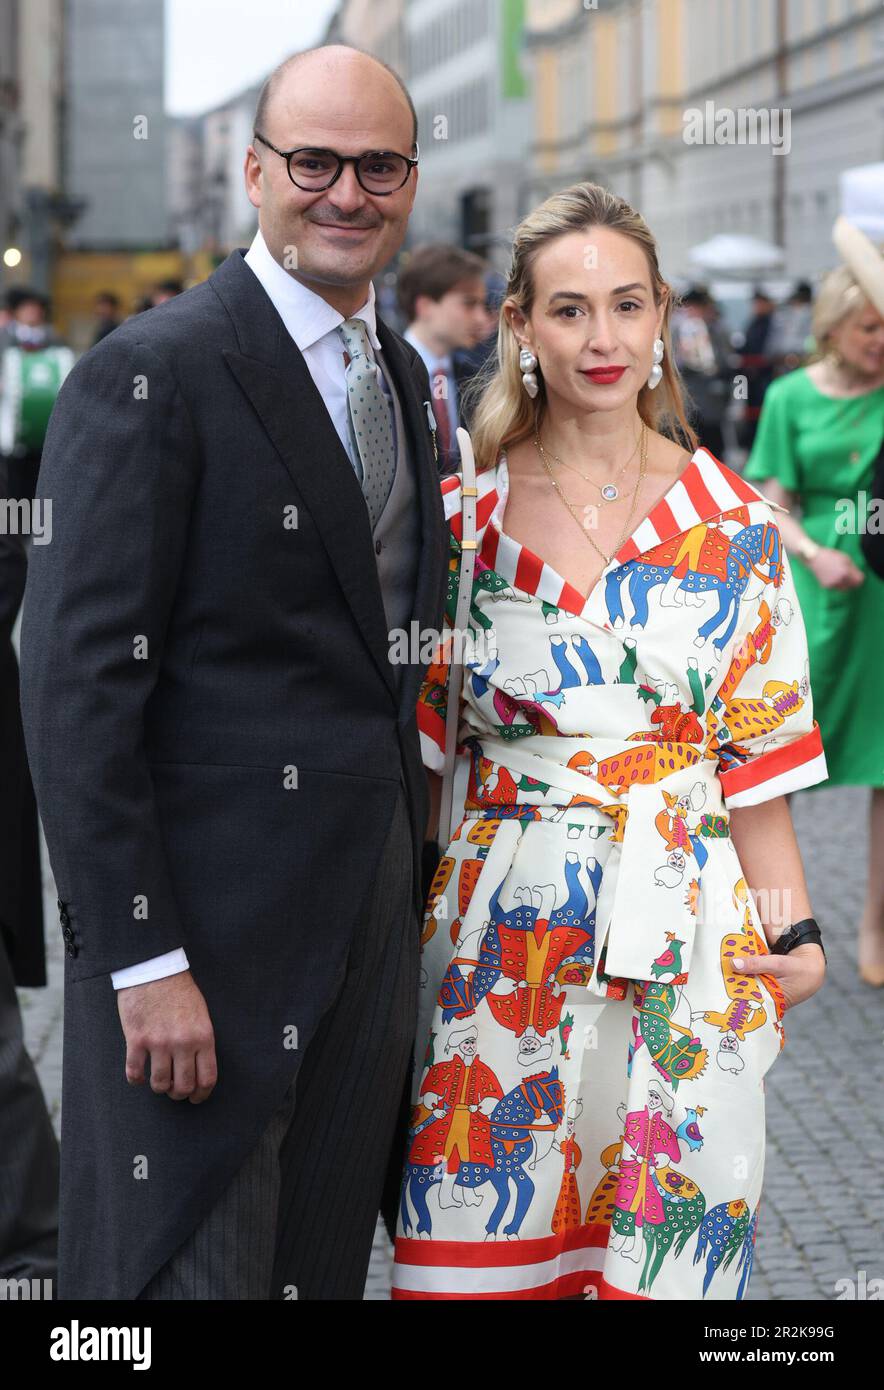 Munich, Germany. 20th May, 2023. Albert von Thurn und Taxis and his sister Elisabeth von Thurn und Taxis arrive at the Theatinerkirche for the church wedding of Ludwig Prince of Bavaria and Sophie-Alexandra Evekink. Around 1,000 guests are expected to attend the festivities. Credit: Karl-Josef Hildenbrand/dpa/Alamy Live News Stock Photo